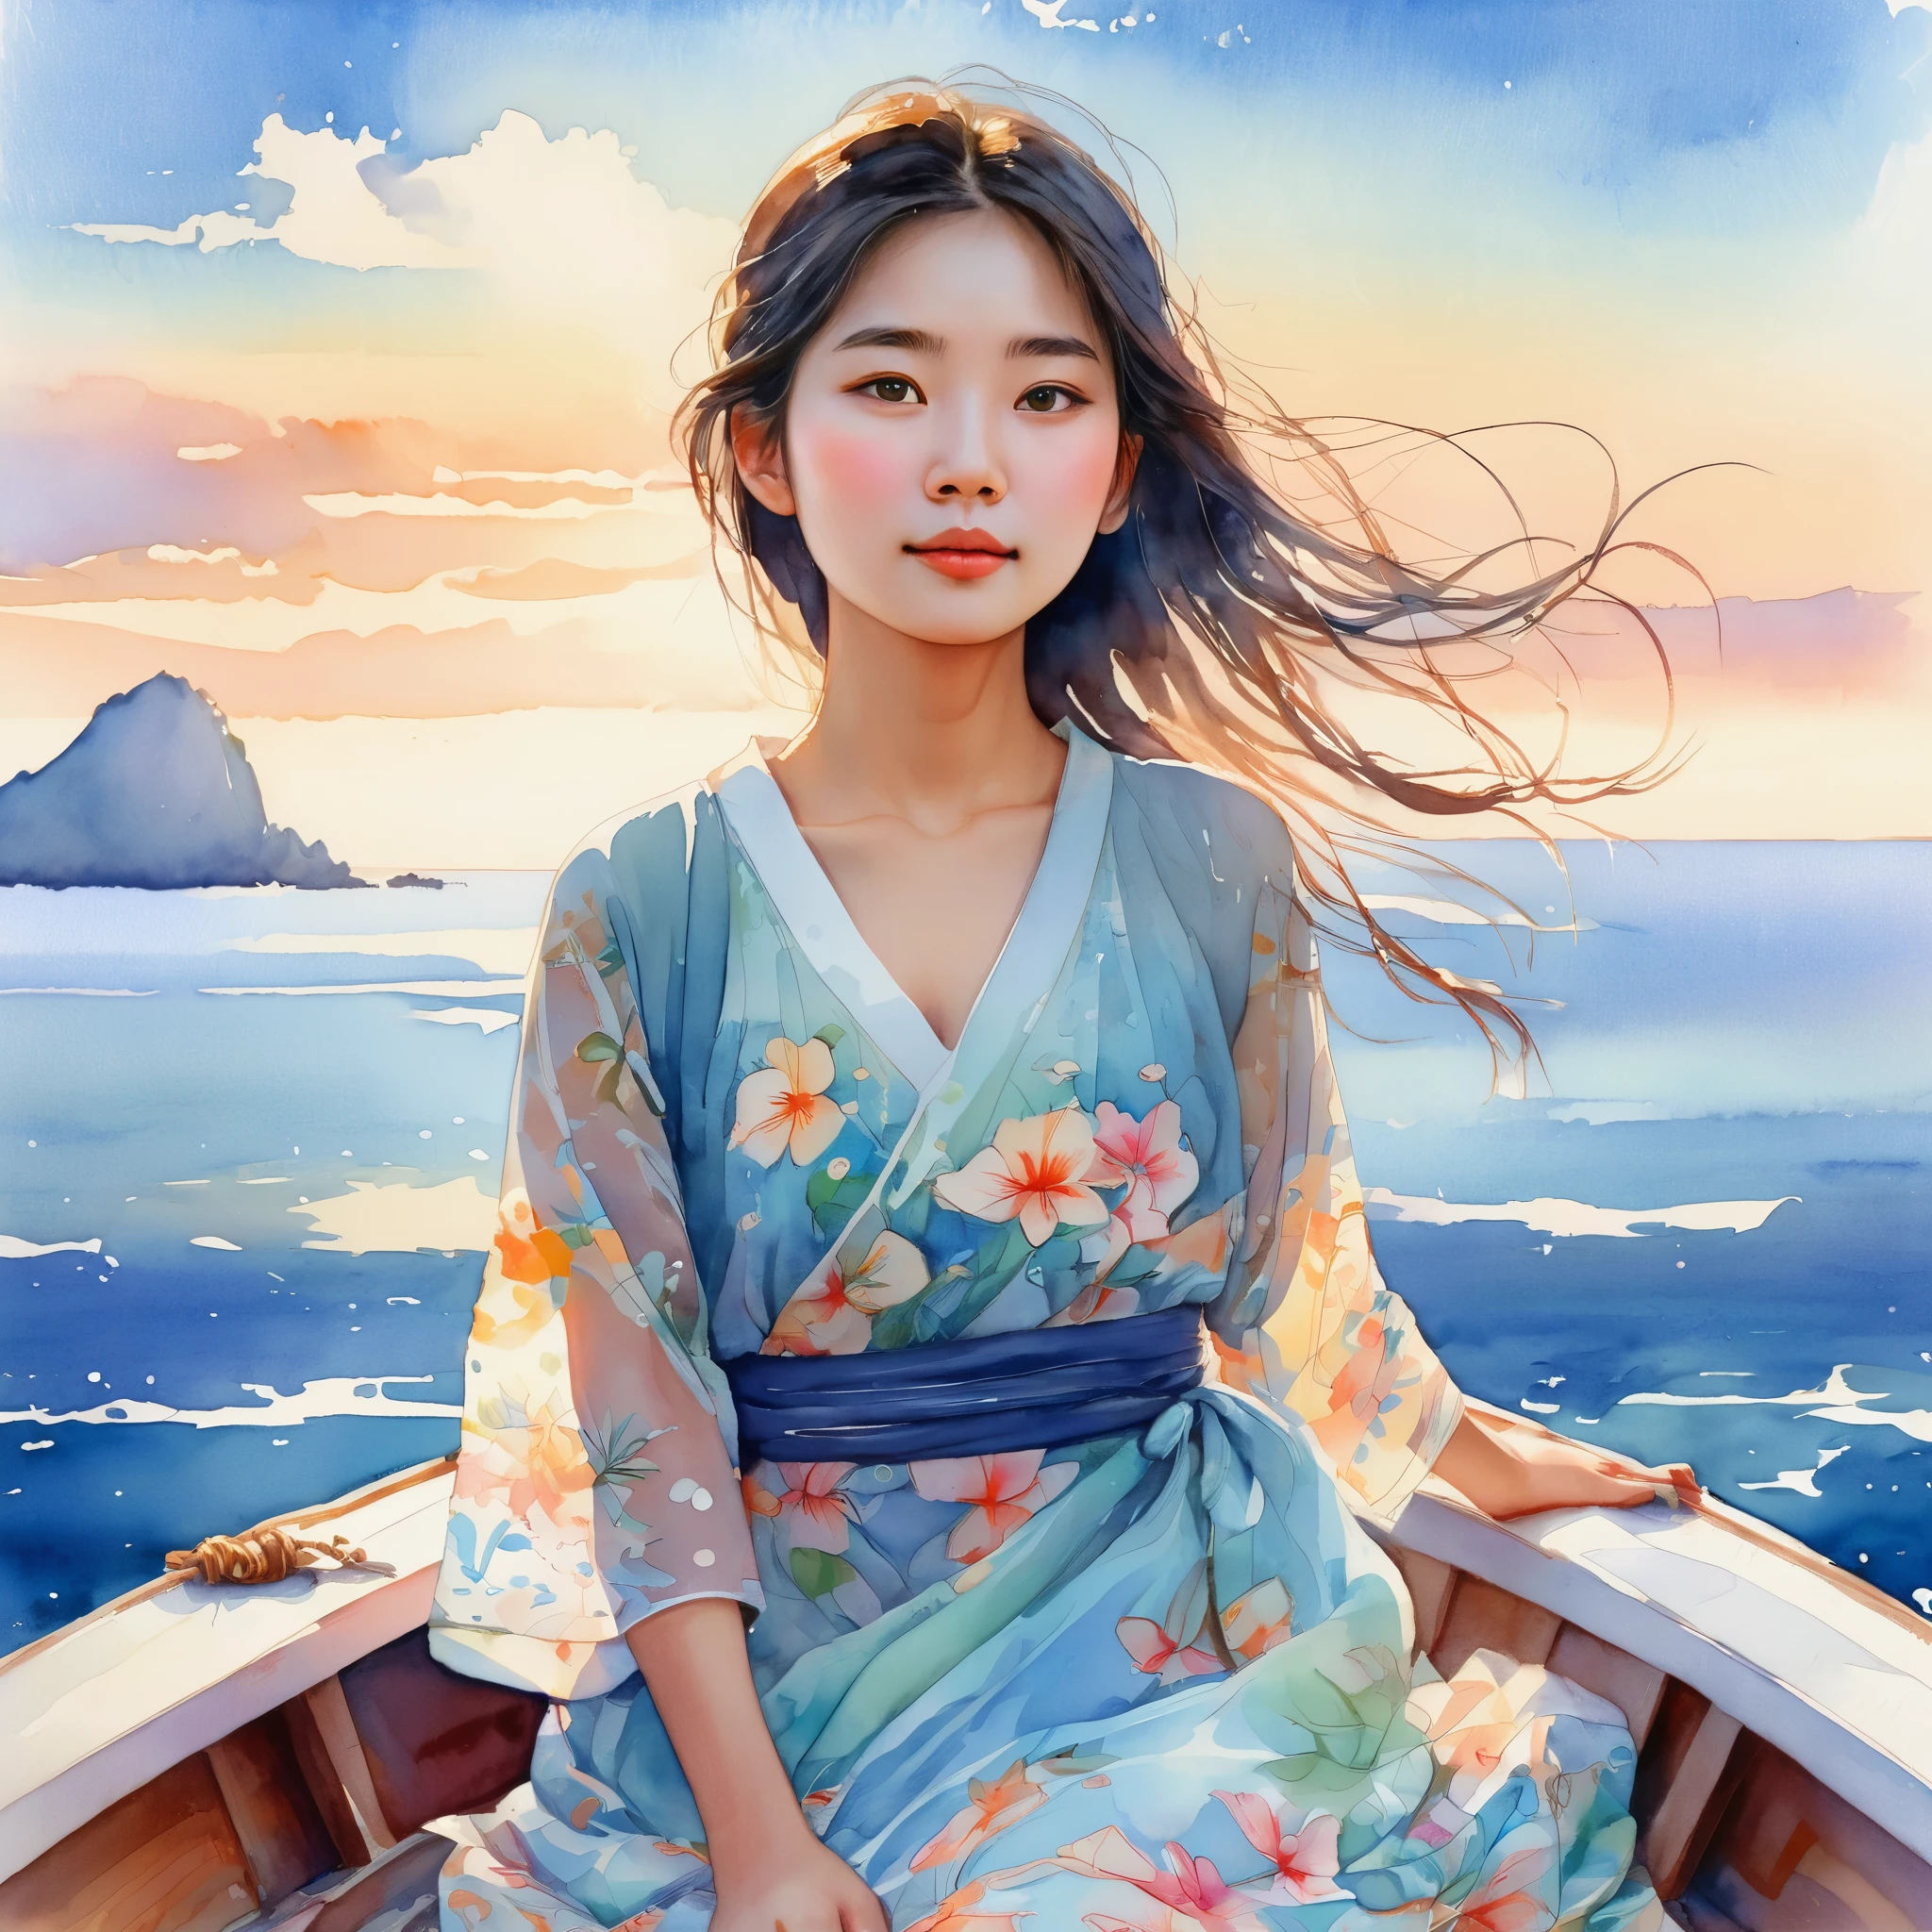 (young girl,tiny boat,asian,horizon,ocean view),illustration,watercolor painting,vibrant colors,soft lighting,beautiful detailed eyes,floating dress,peaceful atmosphere,serene expression.